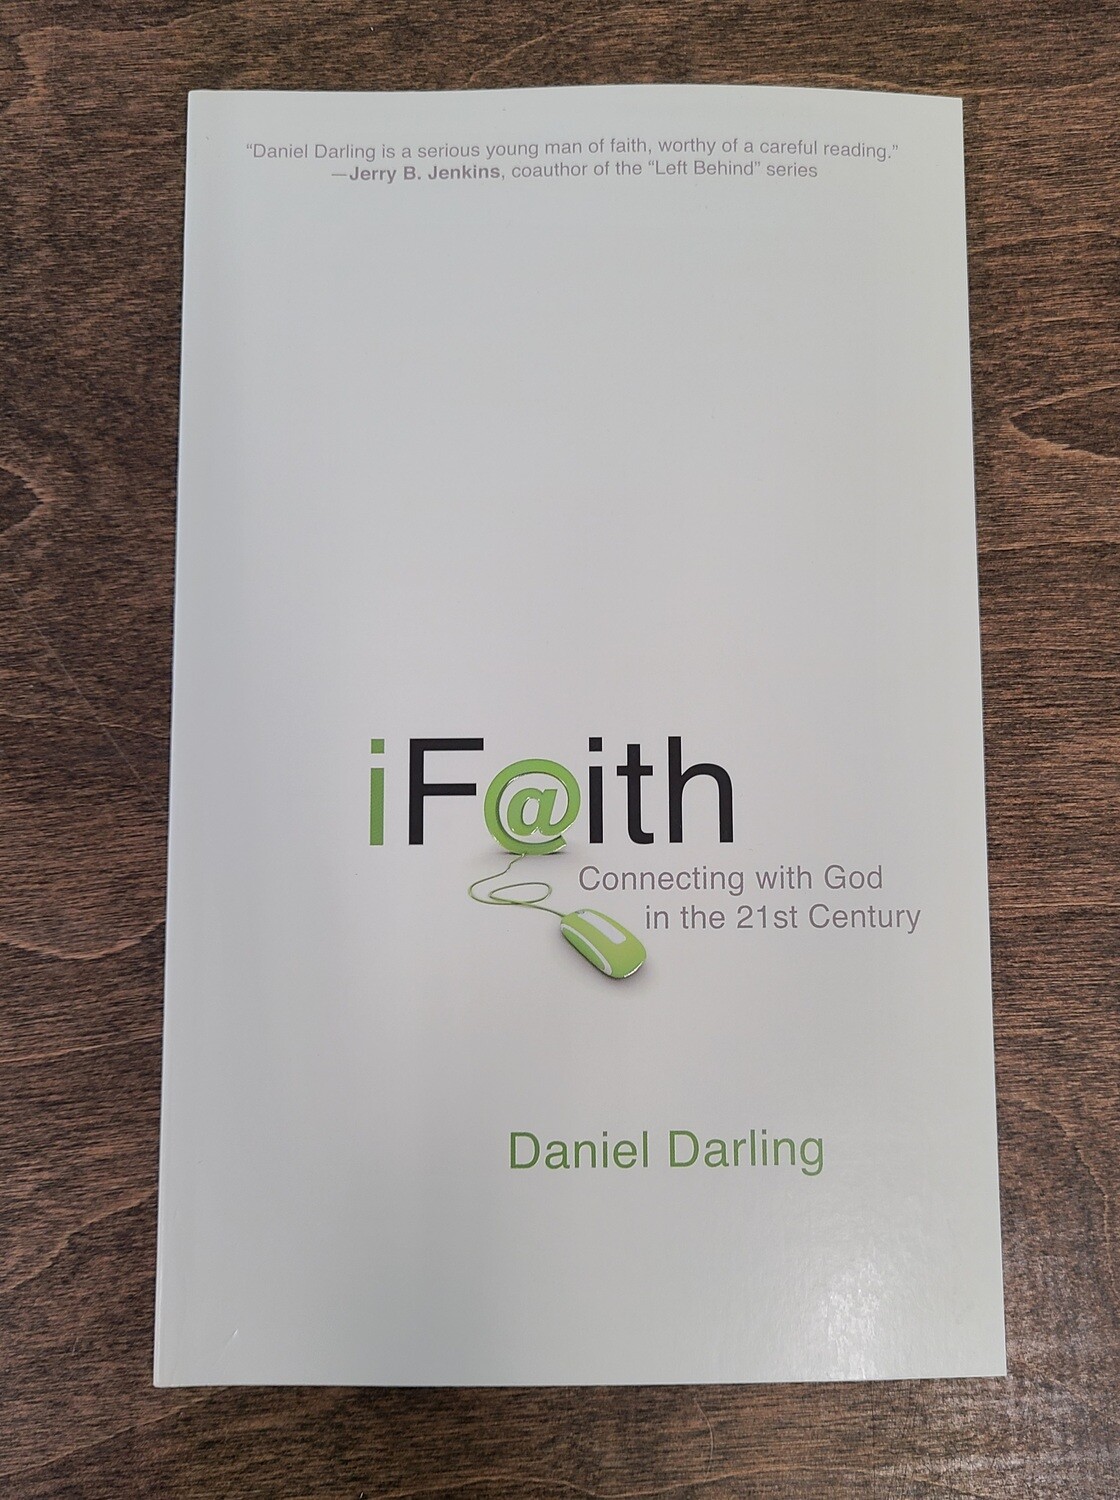 iFaith: Connecting with God in the 21st Century by Daniel Darling